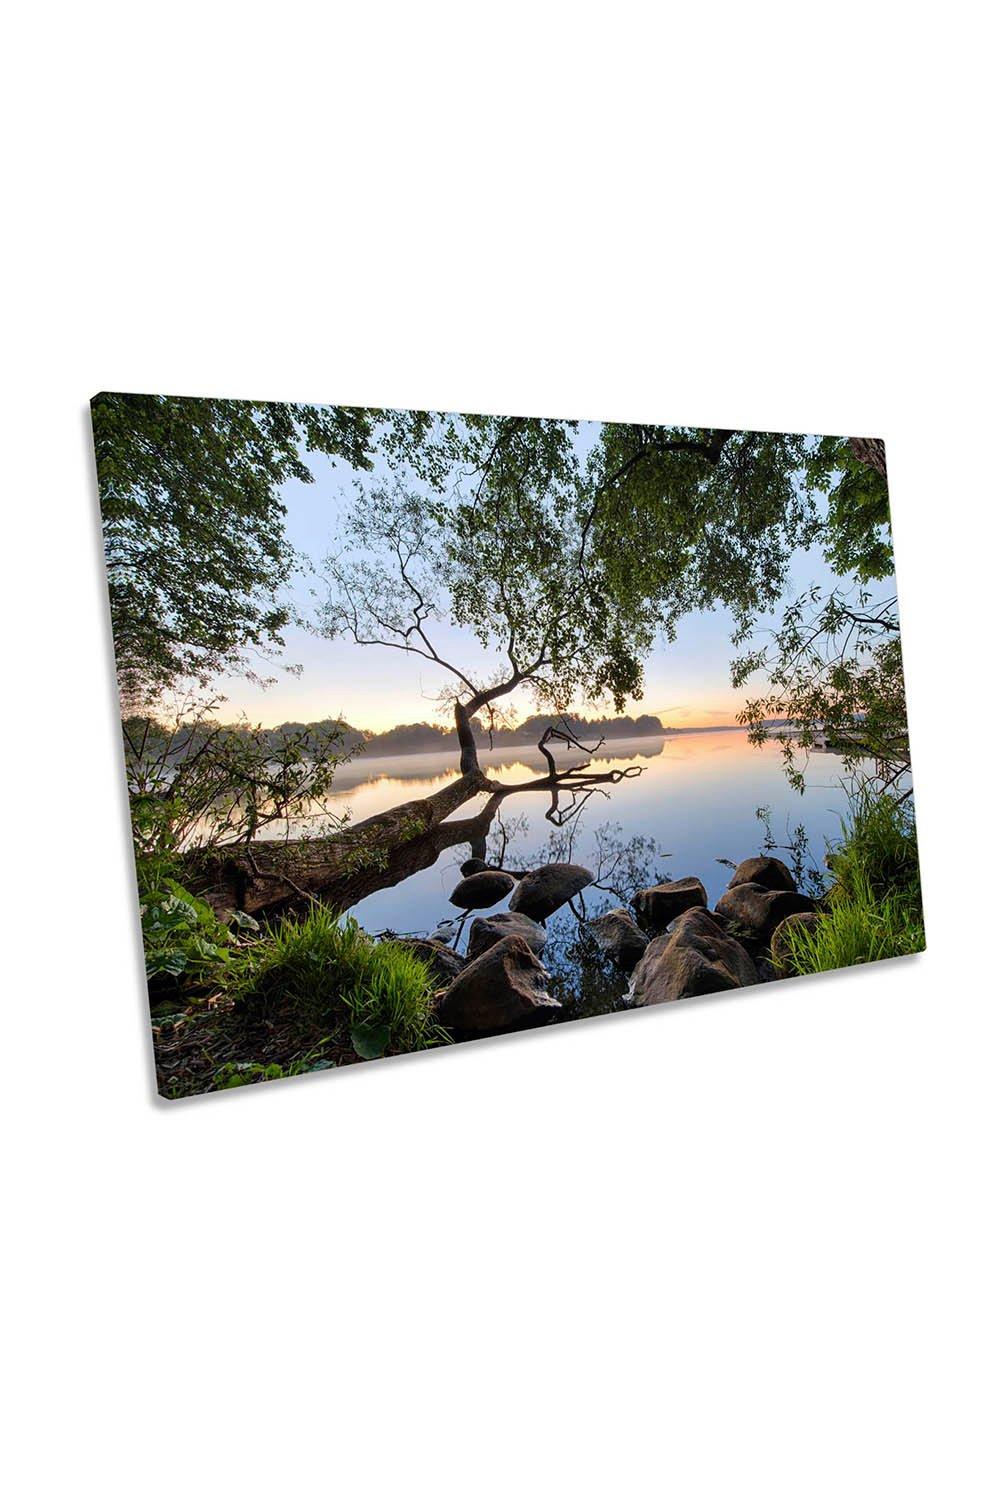 Fallen Tree Lake Scenic Sunset Canvas Wall Art Picture Print